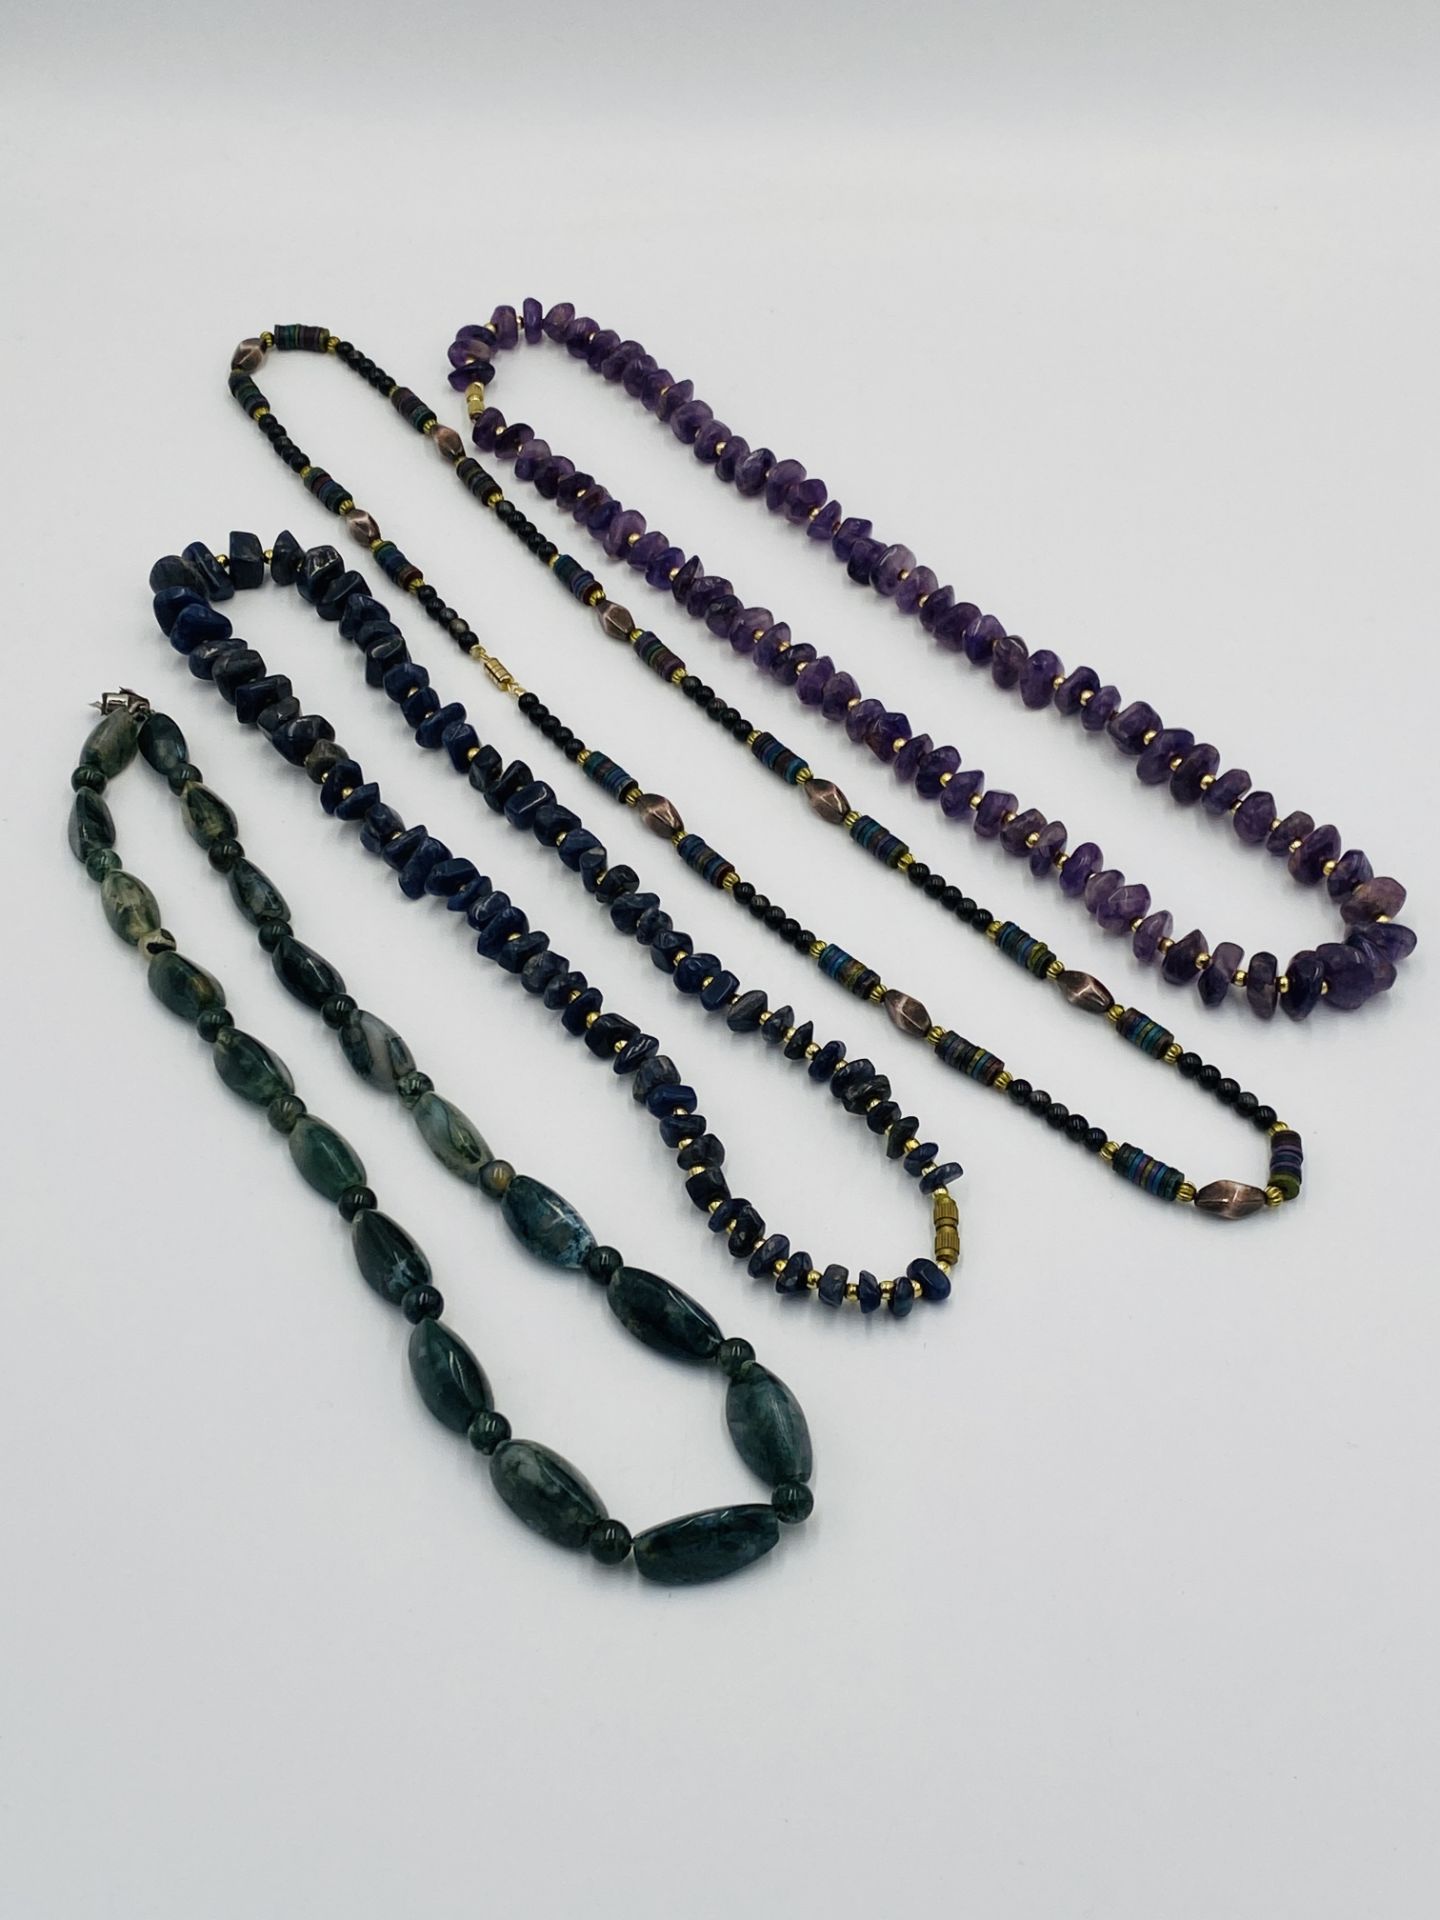 Four agate bead necklaces